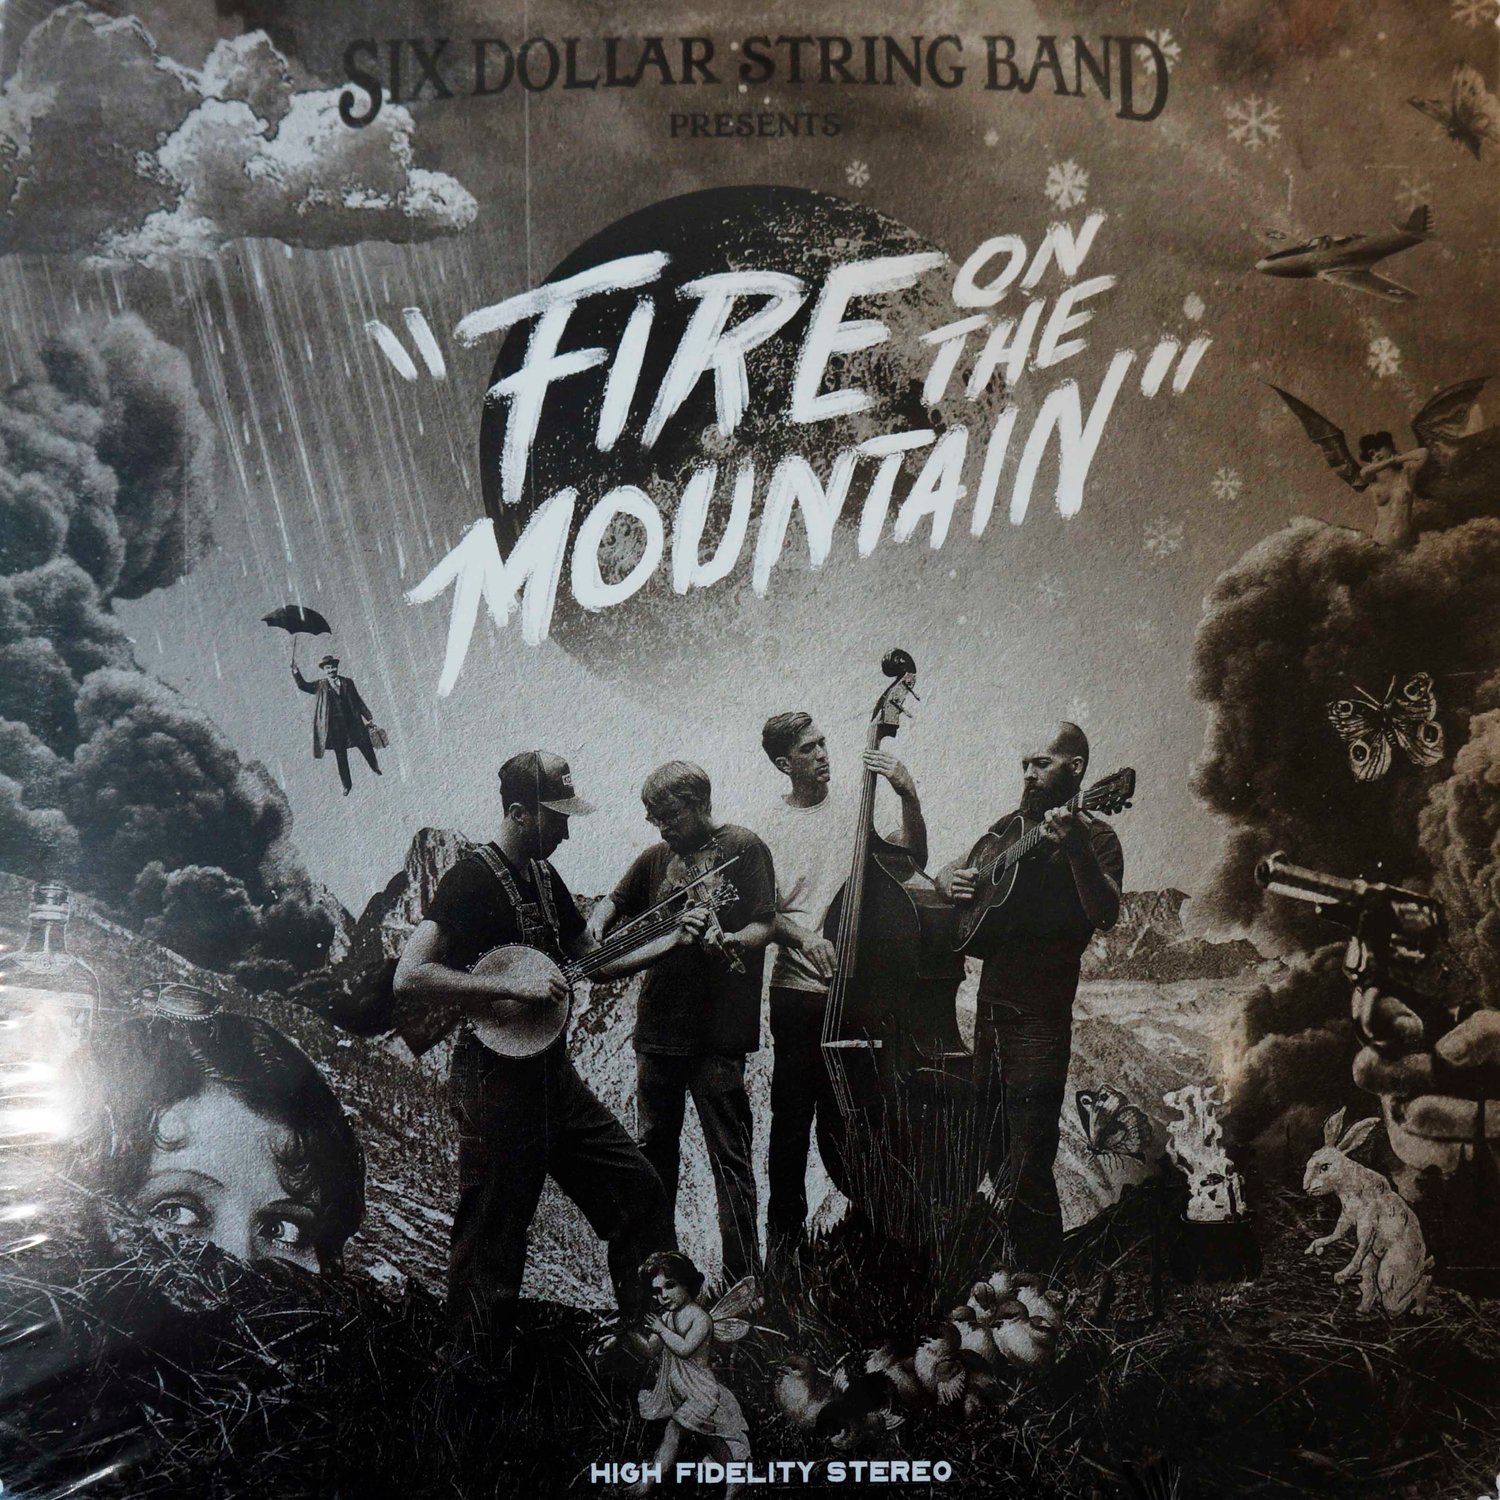 "Fire on the Mountain" Double LP by Six Dollar String Band